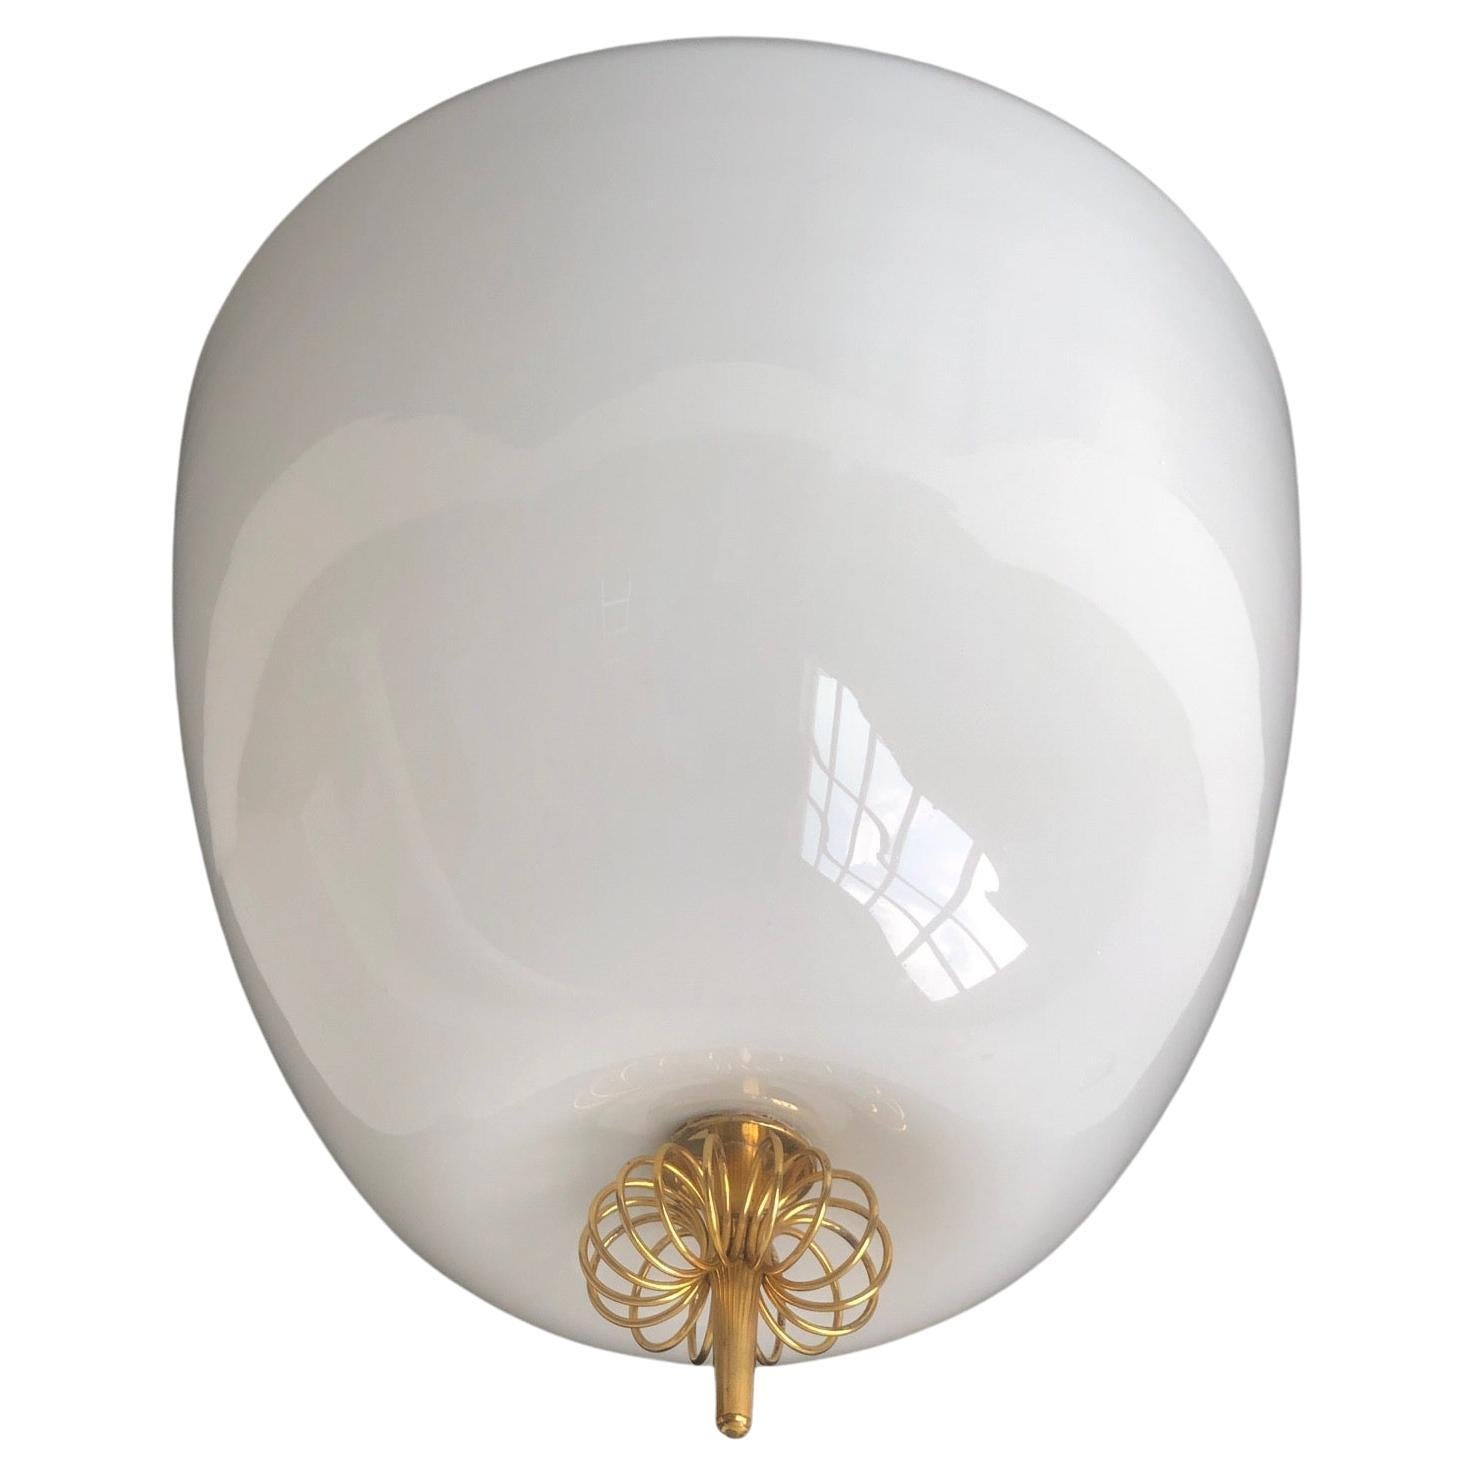 Large Flush Mount light by Gunnel Nyman for Idman, 3 available.